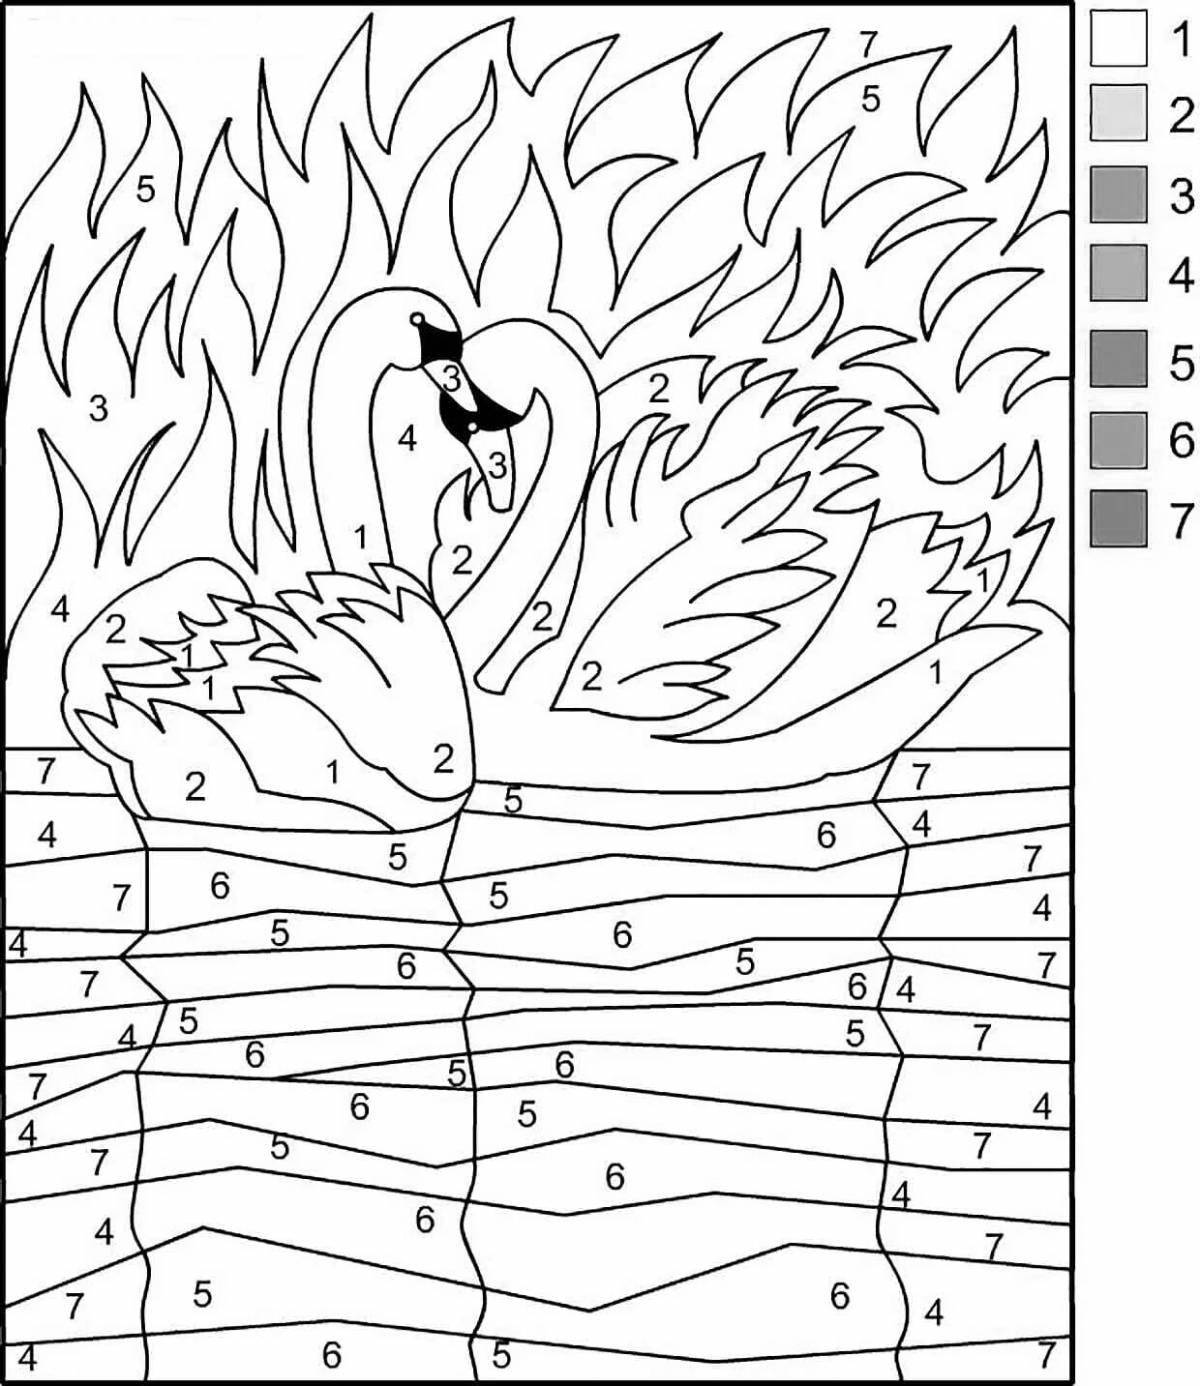 Color-vibrant coloring page by numbers hack